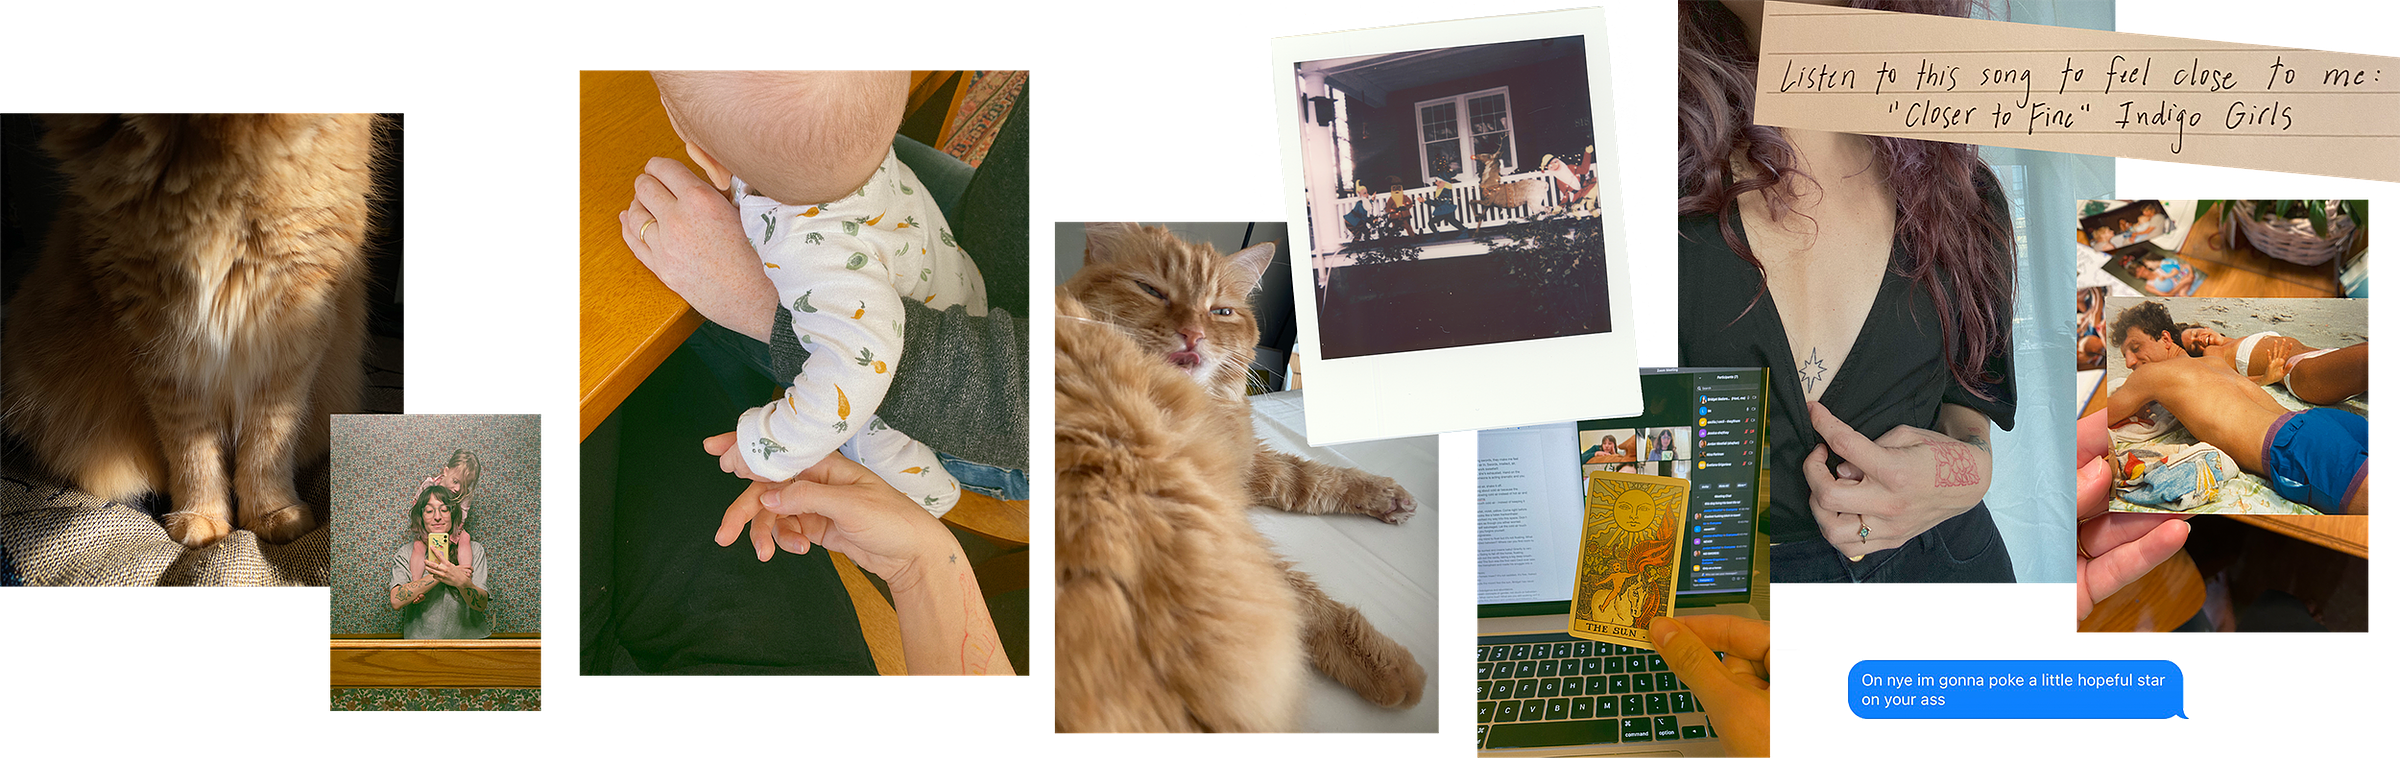 A collage of 10 images in a line. From left to right, the first is a photograph of an orange fluffy cat's paws. The second is an iphone selfie of the author in a bathroom mirror with a child resting on their shoulders. The third is a photograph a baby in the arms of the author's partner. The baby's hand is holding the author's finger. Fourth is a photograph on the orange fluffy cat with her tongue out. Fifth is a polaroid of a porch with christmas decorations on it. Sixth is a photograph of a computer screen with a zoom chat and a hand holding The Sun tarot card from the Smith-Waite tarot deck. The card features a smiling baby on a horse with a huge radiant sun behind them. It is very yellow. The next image is a photograph of the author's star tattoo on their chest. Layered on top is an image pulled from a notebook that says "listen to this song to feel closer to me: closer to fine by the indigo girls." The last image all the way to the right is a photograph of the author's hands holding a printed photograph of their father and mother resting on the beach. Below it is a screenshot of a text message to arti that reads "on nye i'm gonna poke a little hopeful star on your ass"